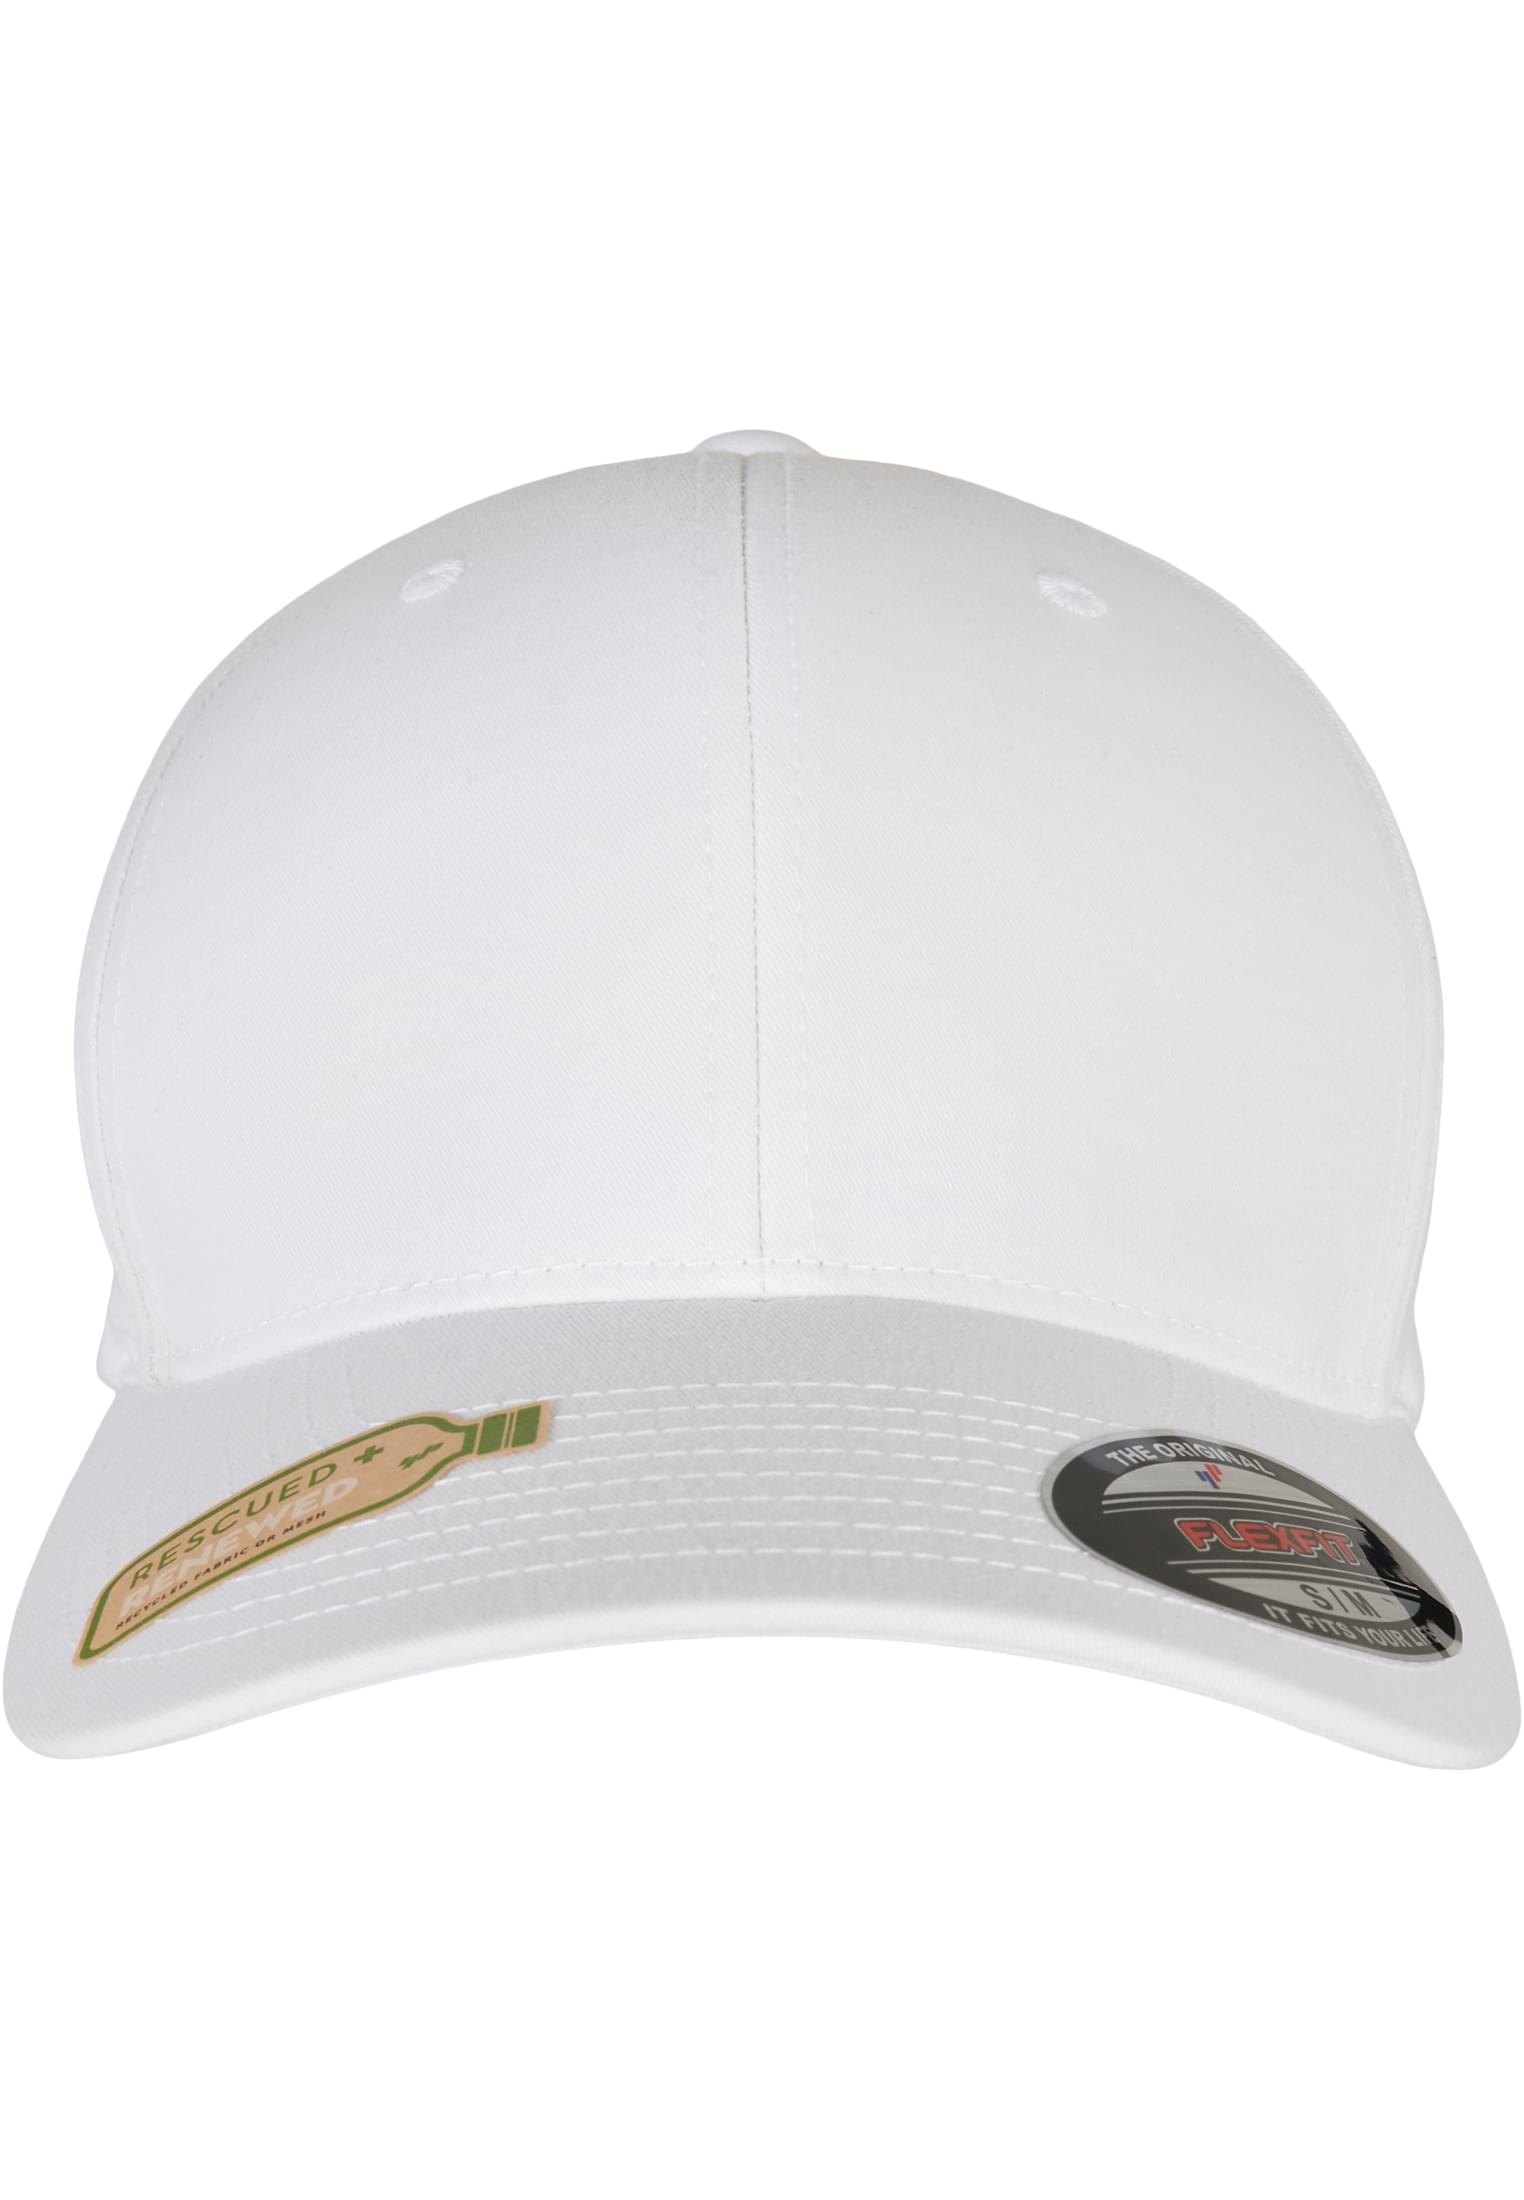 Flexfit Recycled Polyester Cap-6277RP